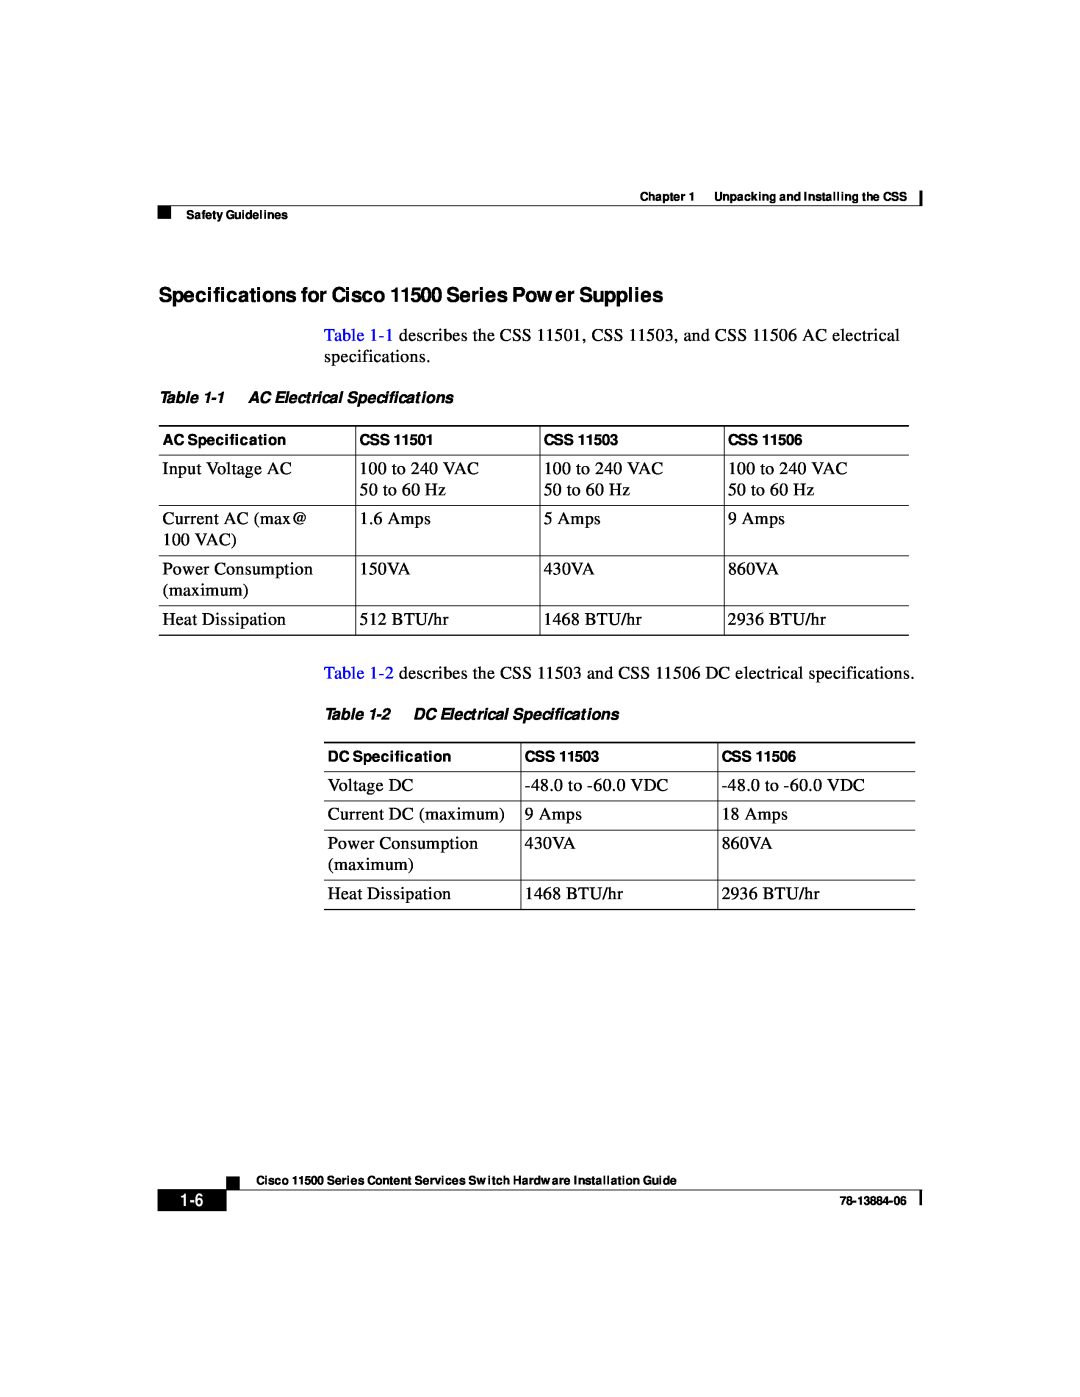 Cisco Systems manual Specifications for Cisco 11500 Series Power Supplies, 1 AC Electrical Specifications 